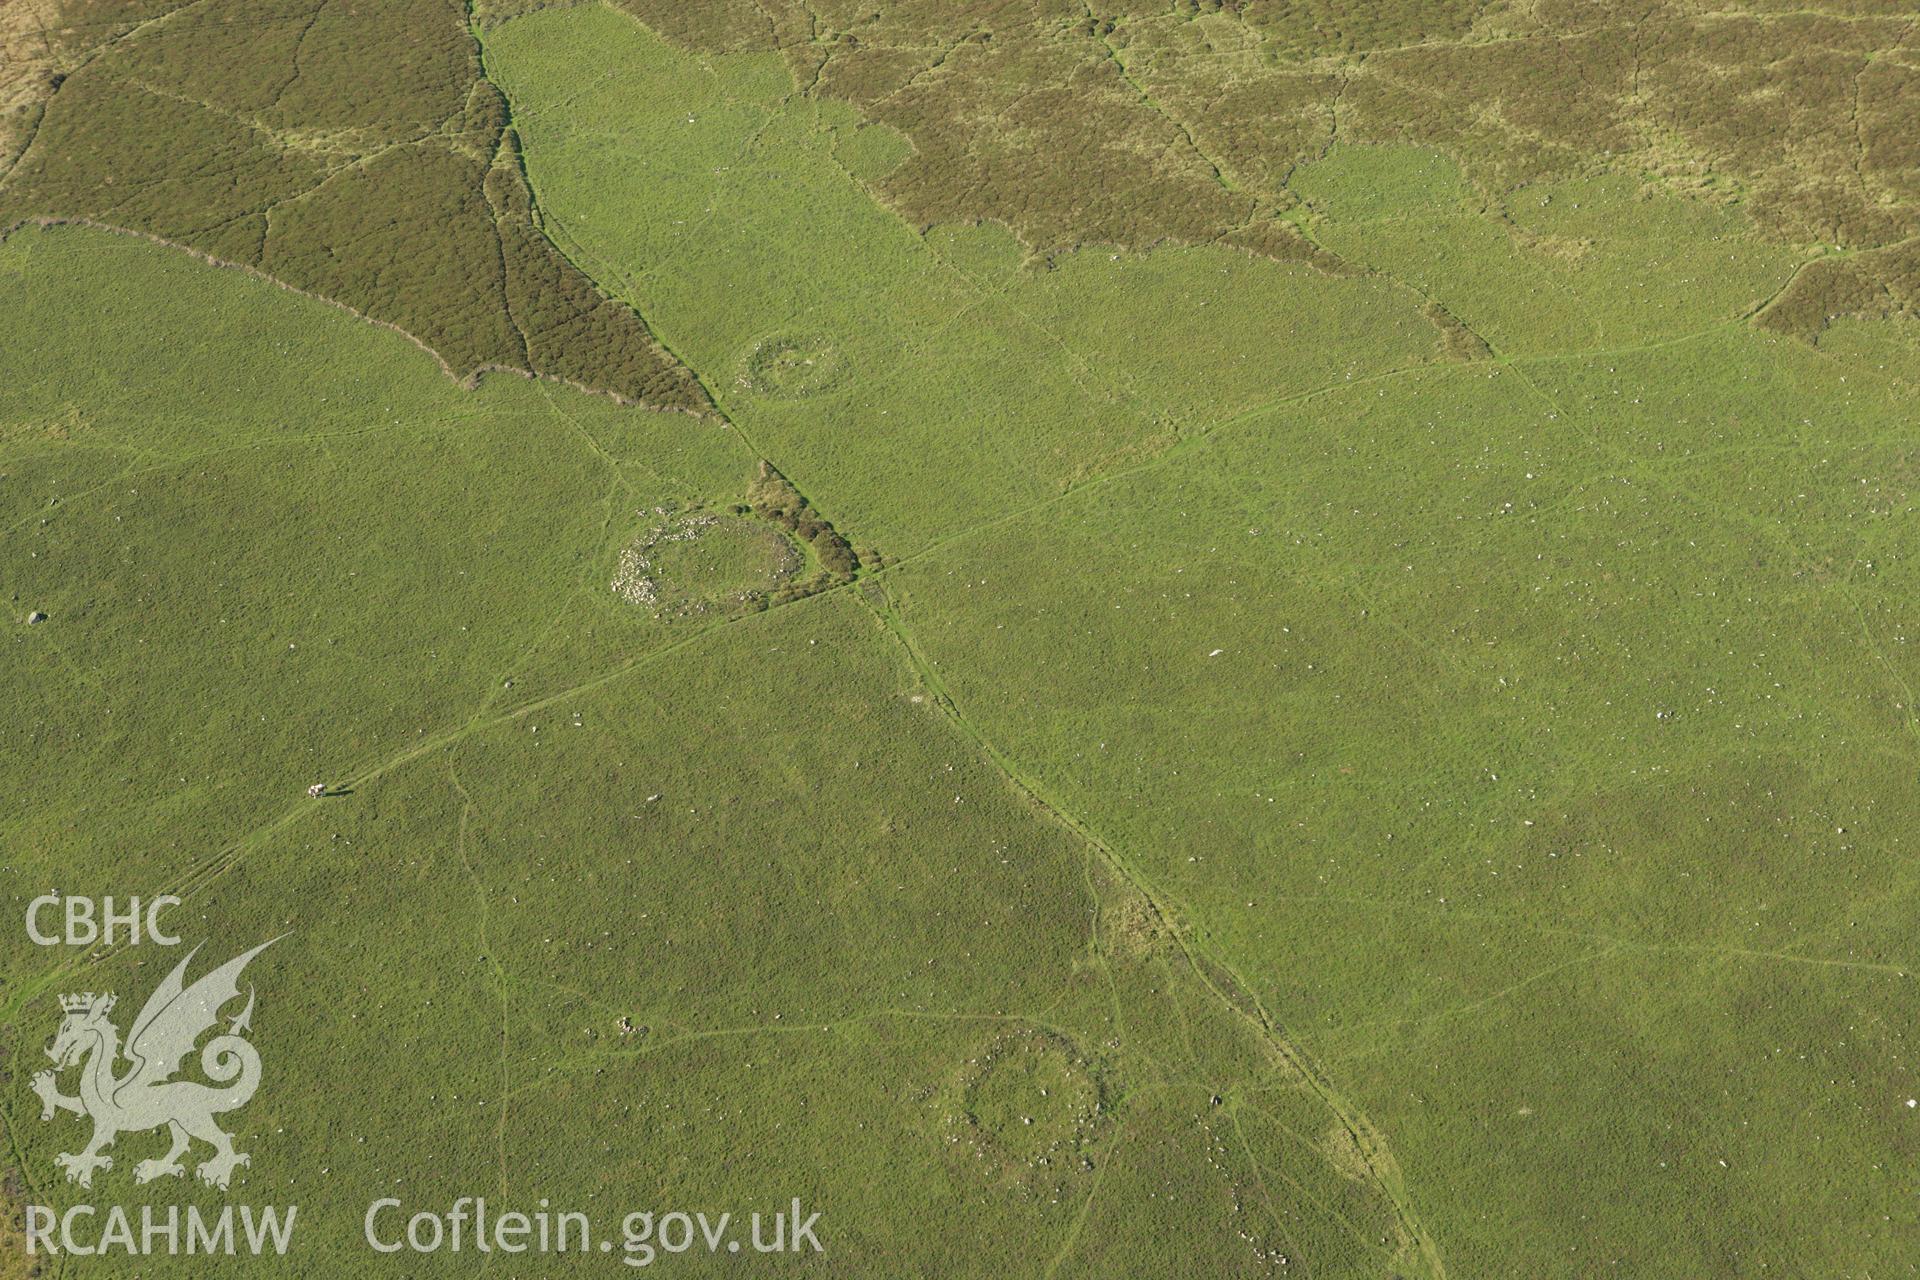 RCAHMW colour oblique photograph of Carn Ingli common hut circles. Taken by Toby Driver on 23/10/2007.